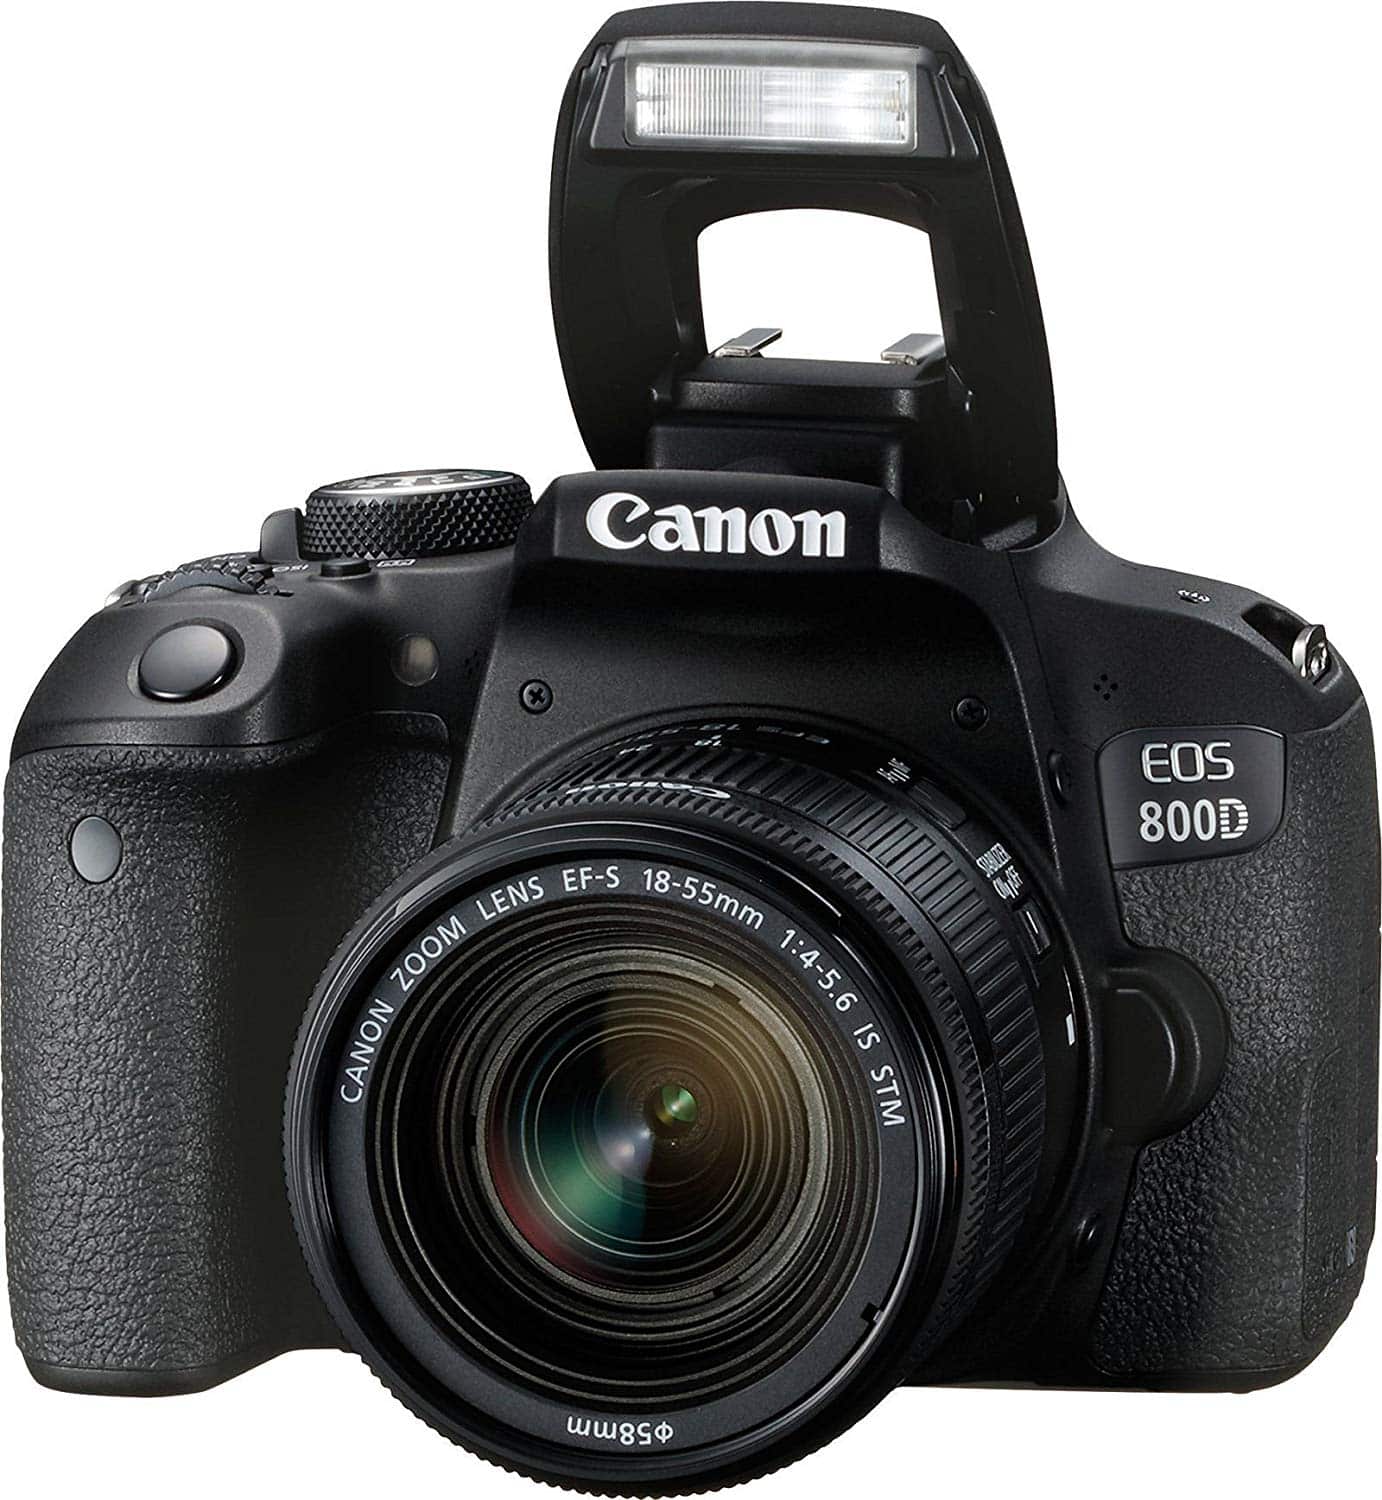 canon-800d-dslr-camera-price-in-bangladesh-source-of-product